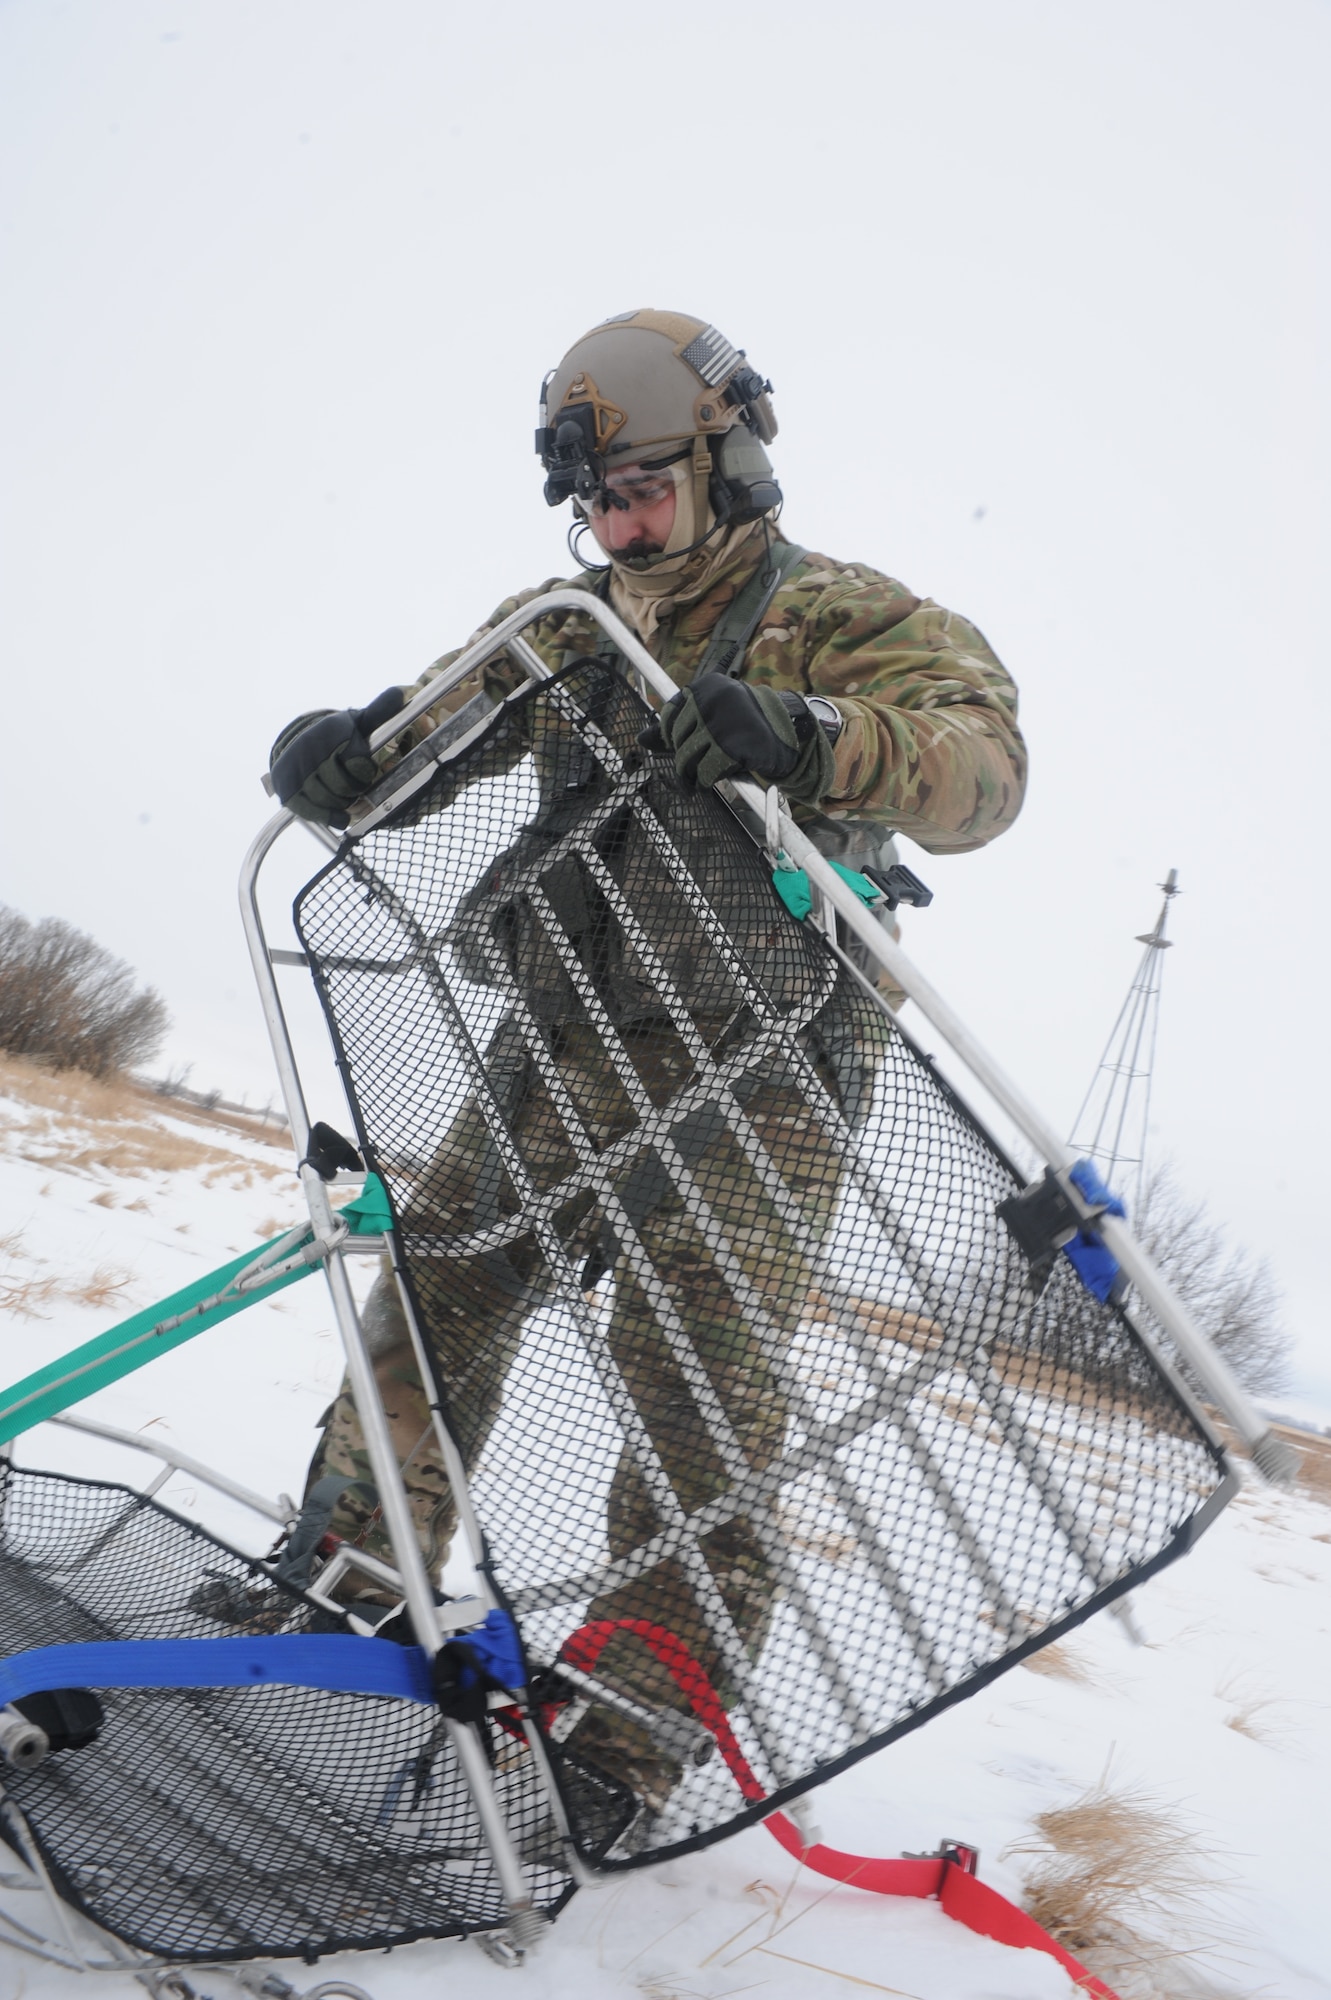 Tech. Sgt. Thomas Liscomb, 54th Helicopter Squadron flight engineer, assembles a litter near Minot Air Force Base, N.D., Feb. 11, 2015. The litter was used during training to test the crews search and rescue capabilities. (U.S. Air Force photos/Senior Airman Stephanie Morris)